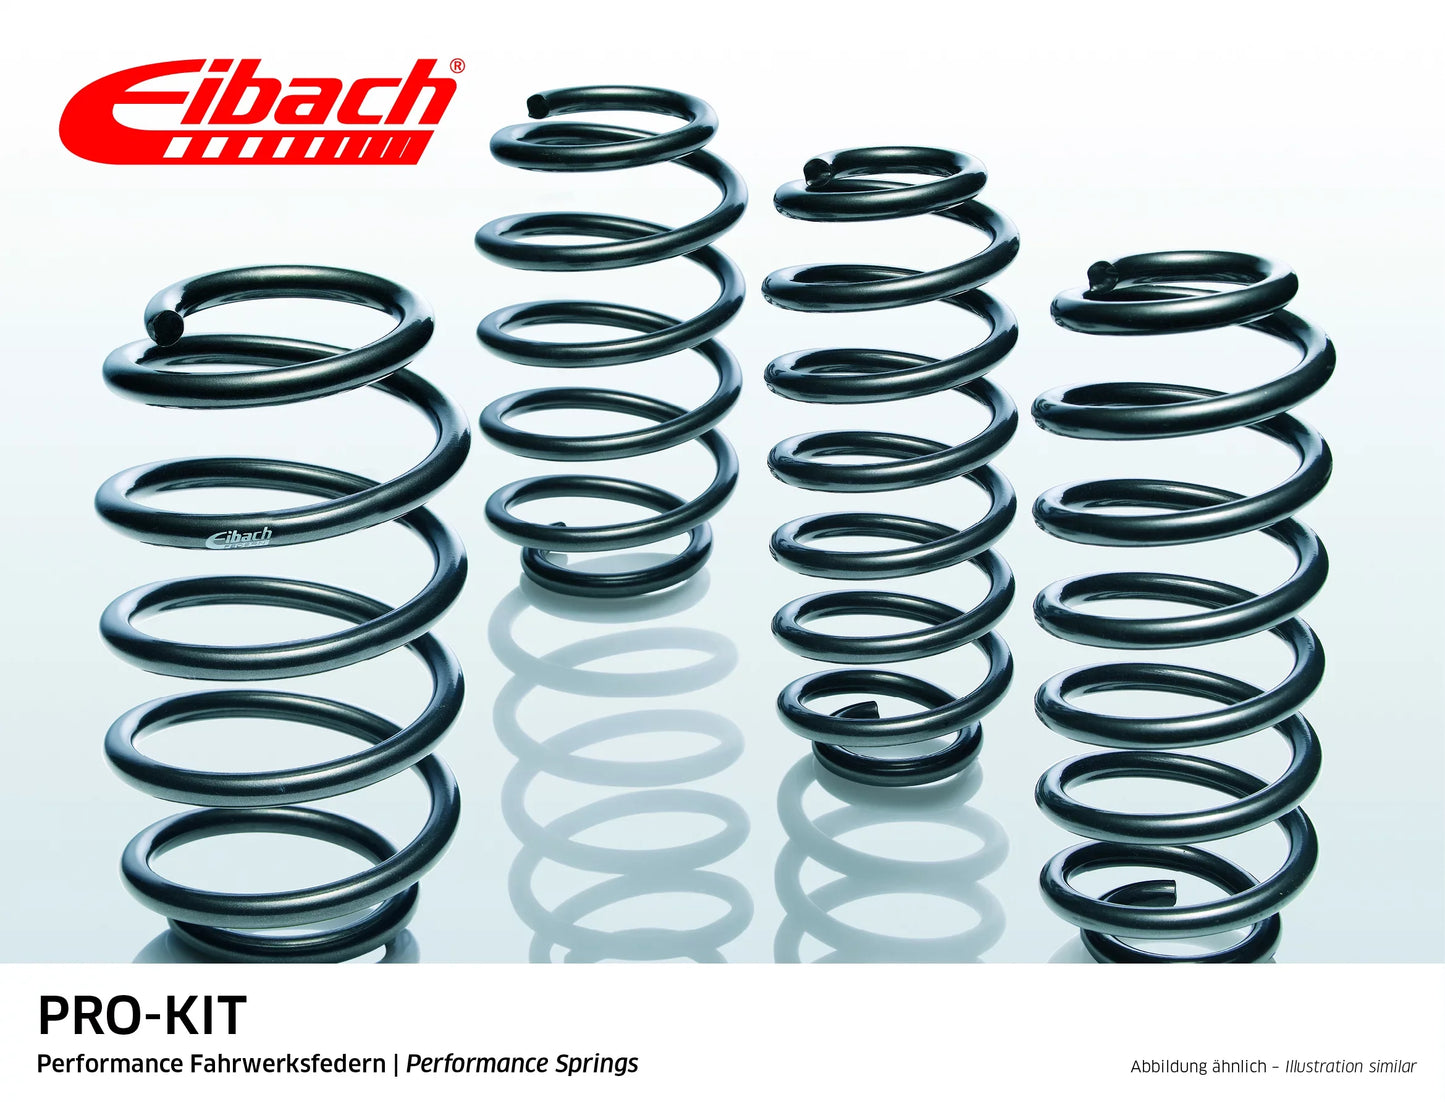 Eibach Pro-Kit Lowering Springs (E2022-140) at £371.54